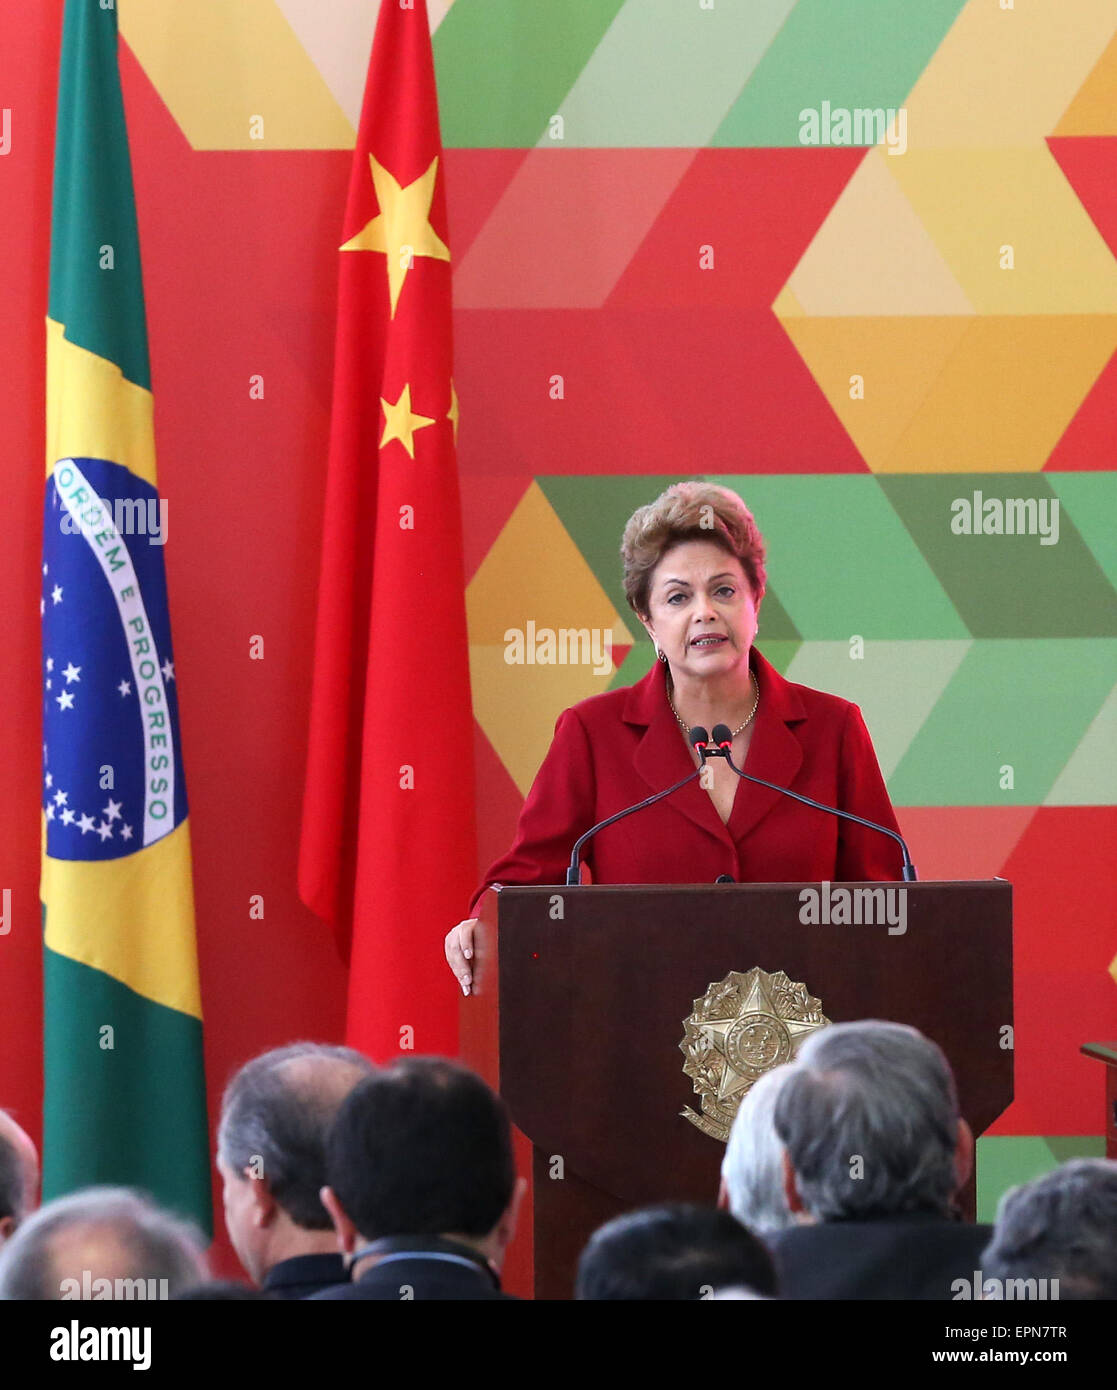 Brasilia, Brazil. 19th May, 2015. Brazilian President Dilma Rousseff attends a joint press conference with visiting Chinese Premier Li Keqiang in Brasilia, capital of Brazil, May 19, 2015. © Pang Xinglei/Xinhua/Alamy Live News Stock Photo